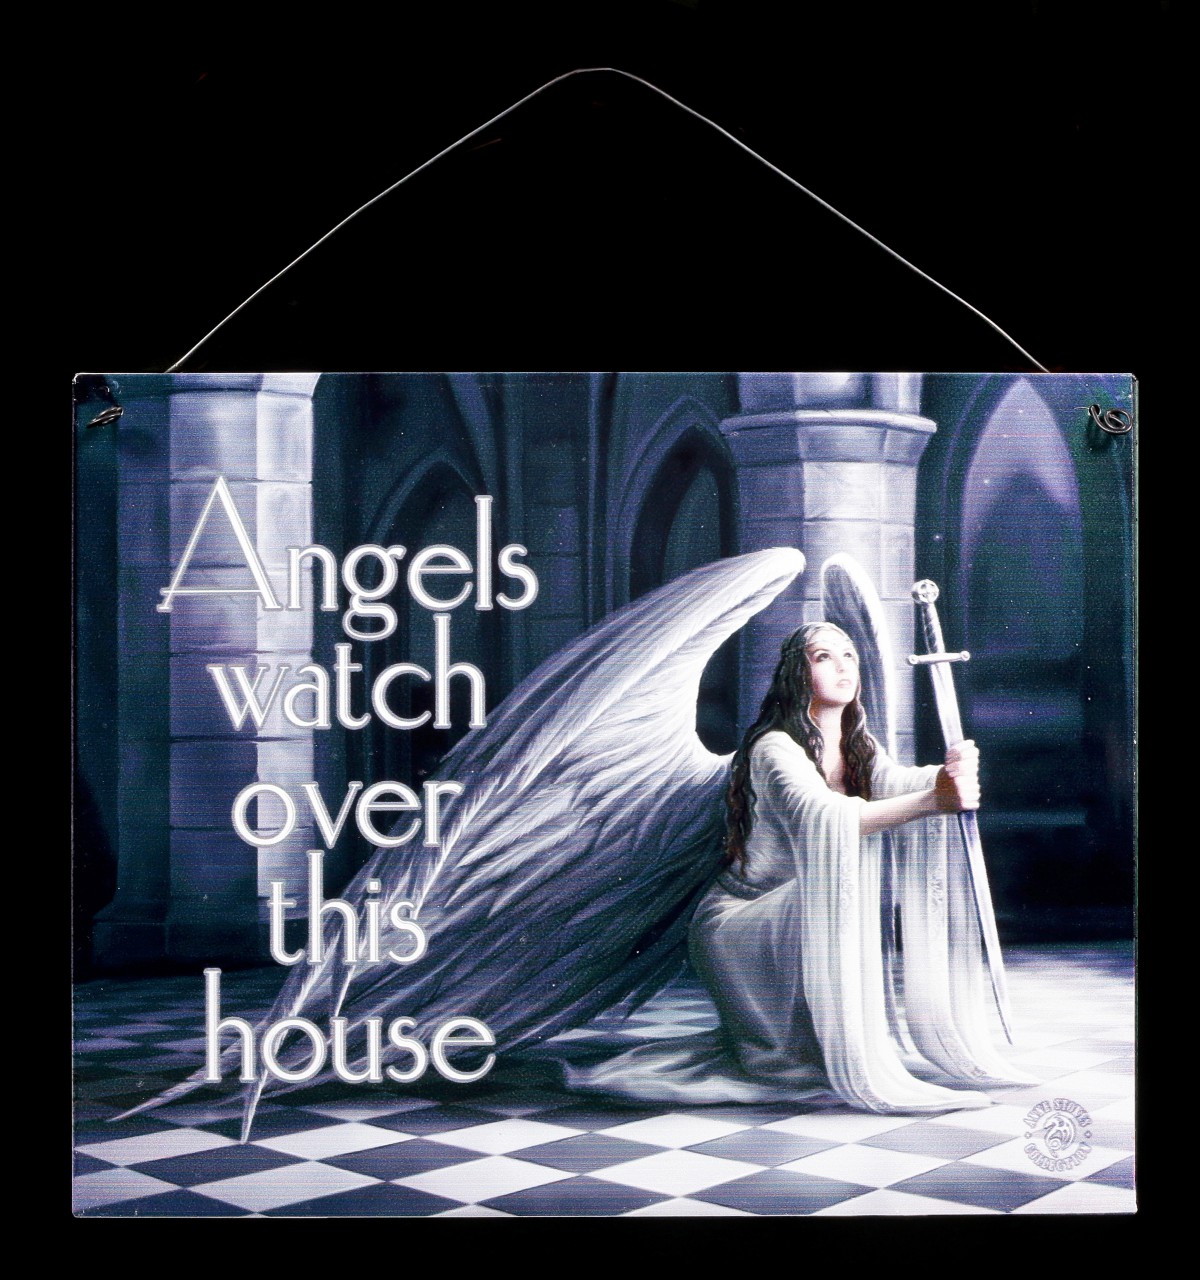 The Blessing Metal Sign - Angels watch over this house